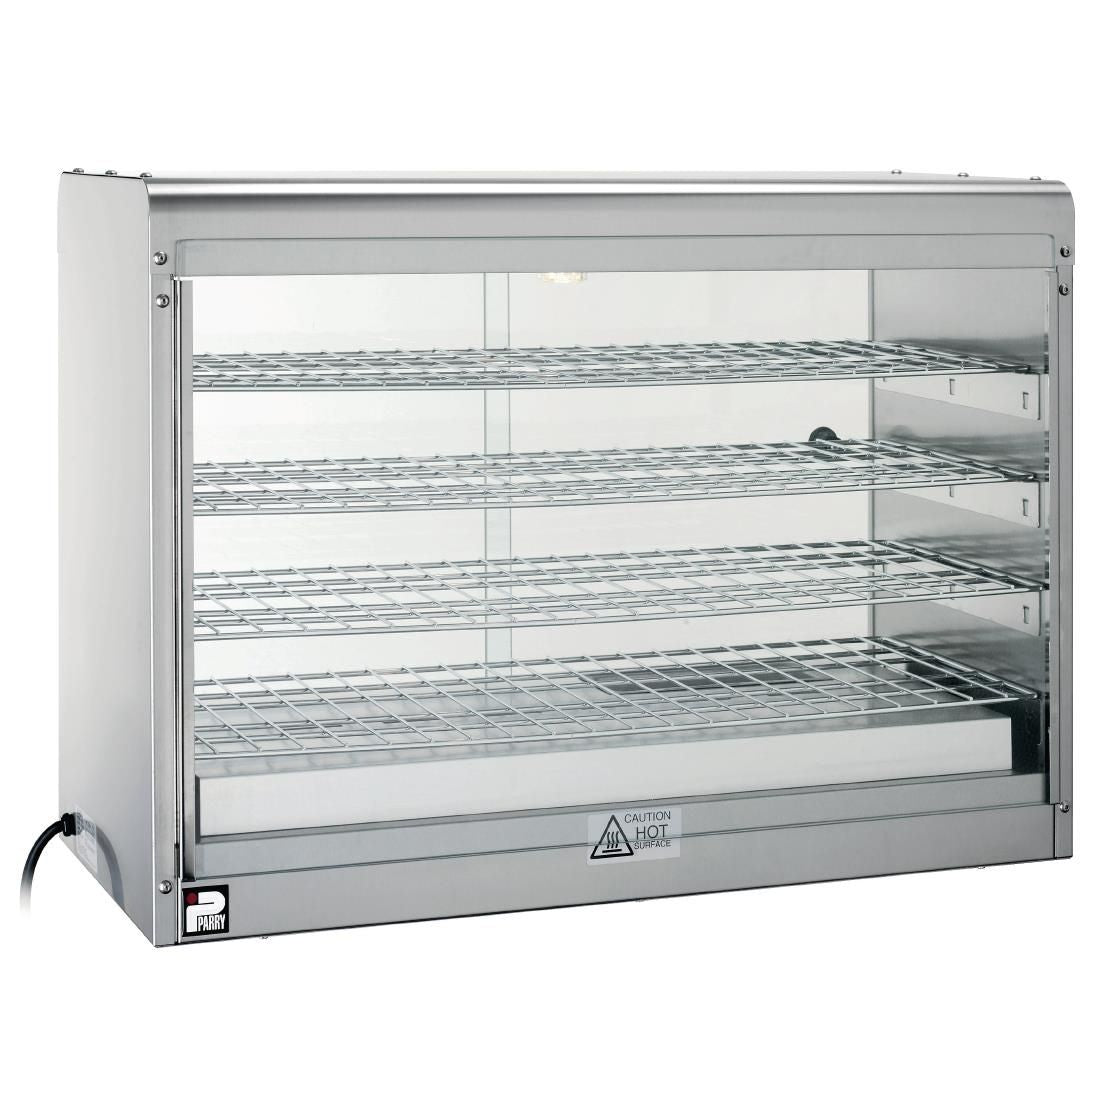 GM754 Parry Pie Cabinet CPC1 JD Catering Equipment Solutions Ltd